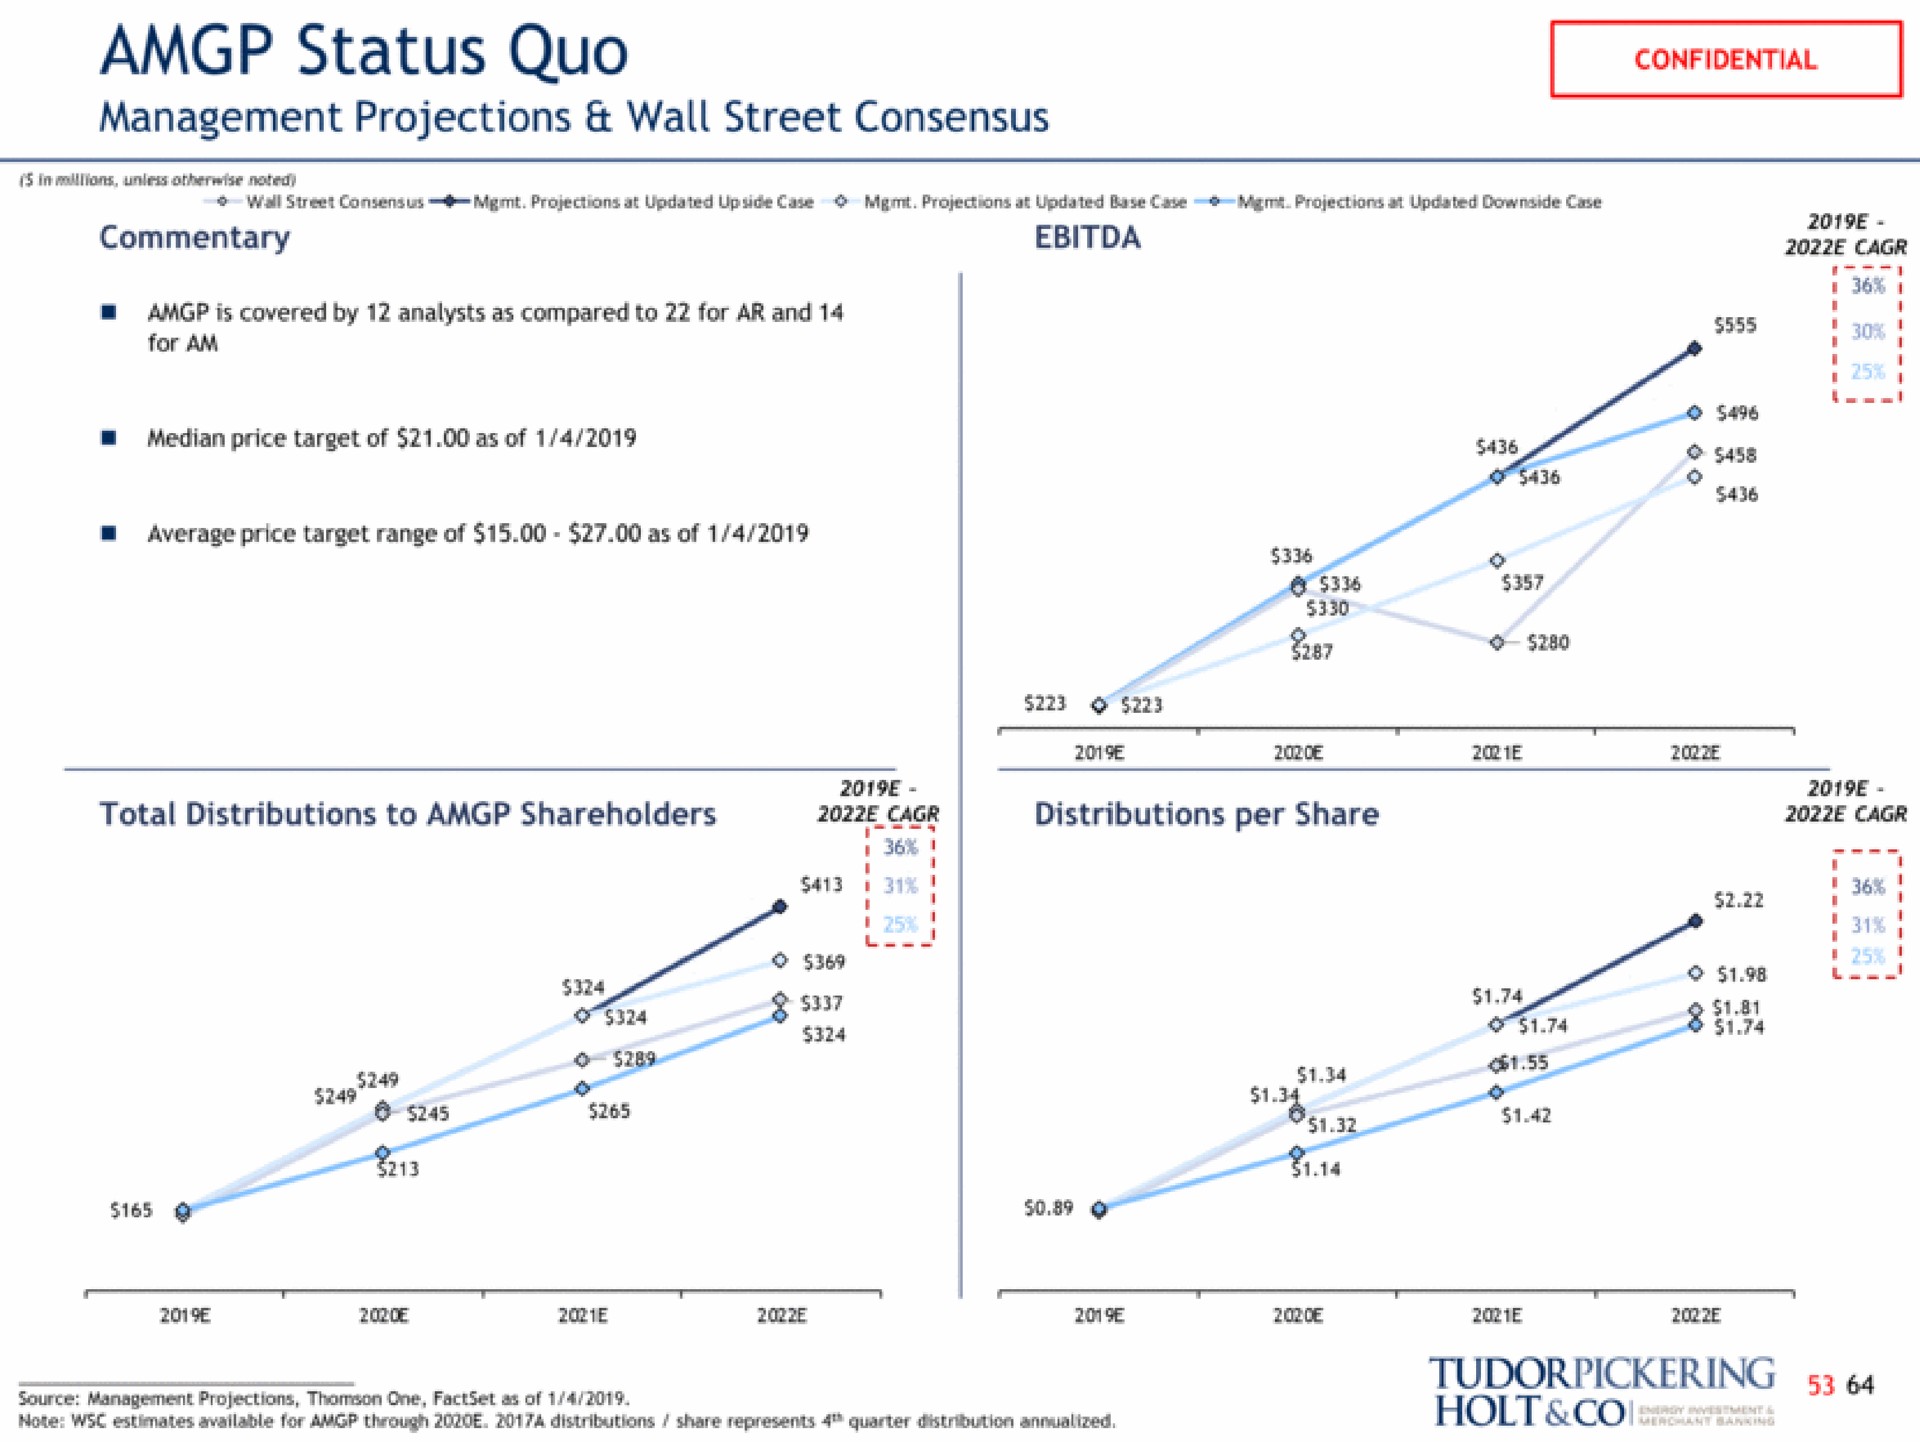 status quo management projections wall street consensus holt | Tudor, Pickering, Holt & Co